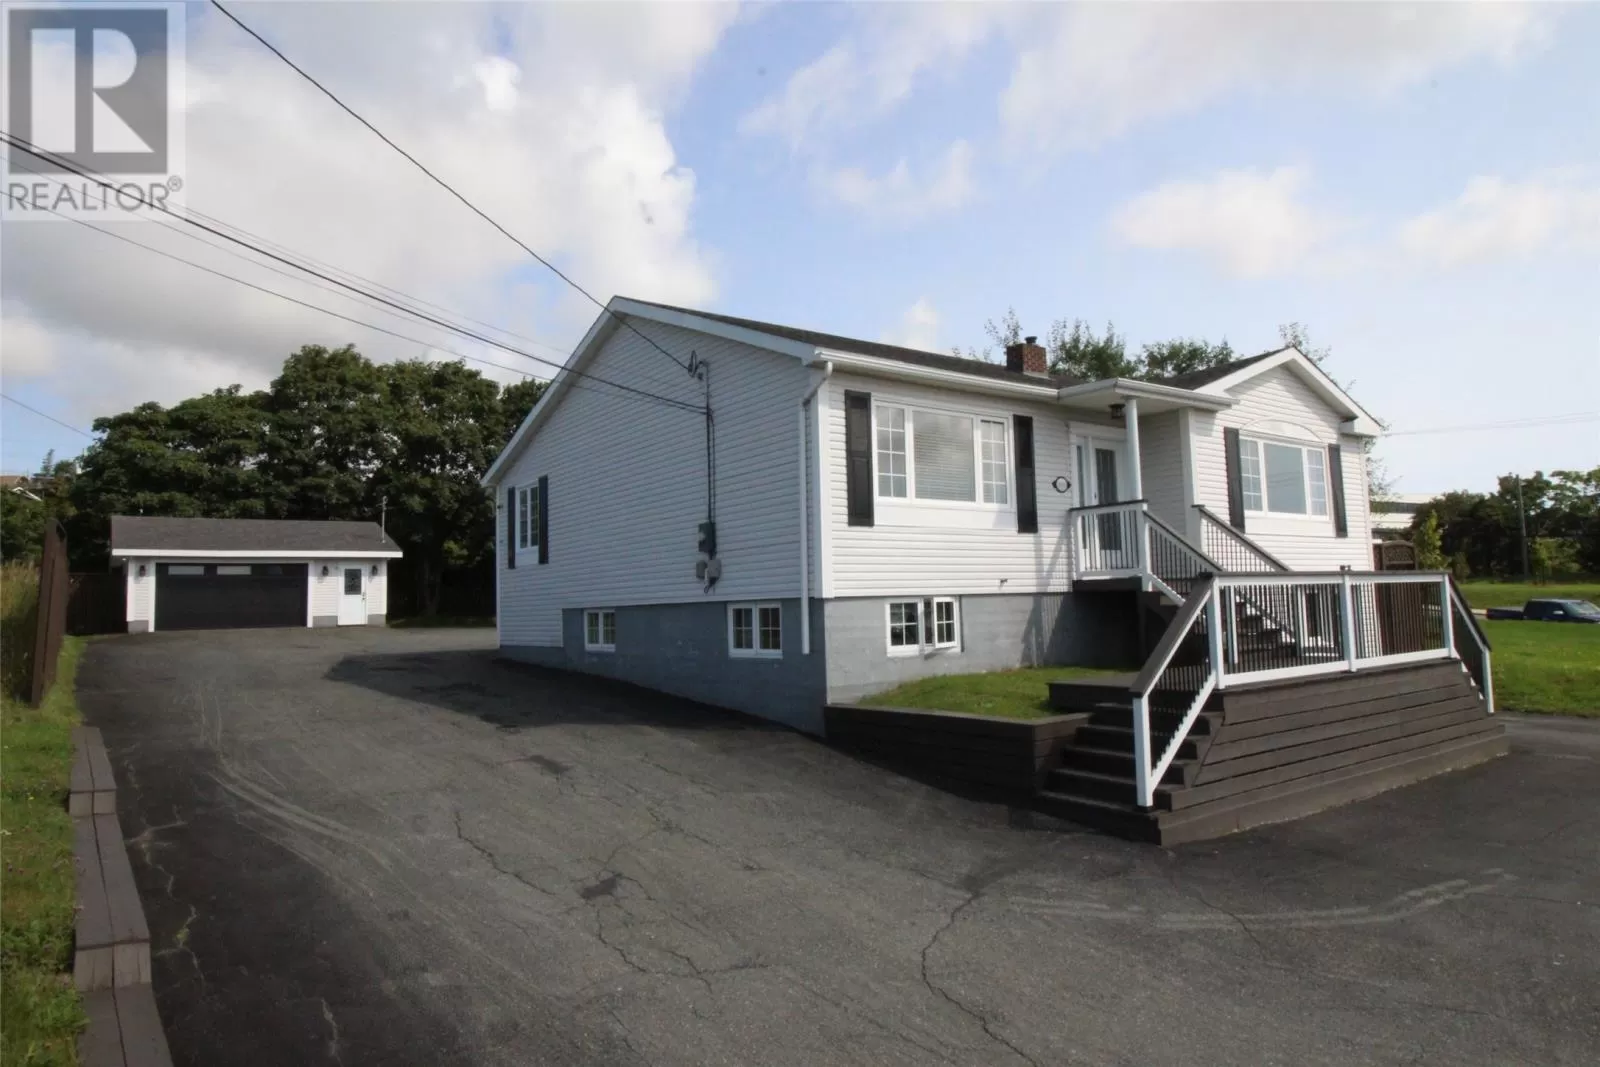 Commercial Mix for rent: 998 Topsail Road, Mt. Pearl, Newfoundland & Labrador A1N 5E5